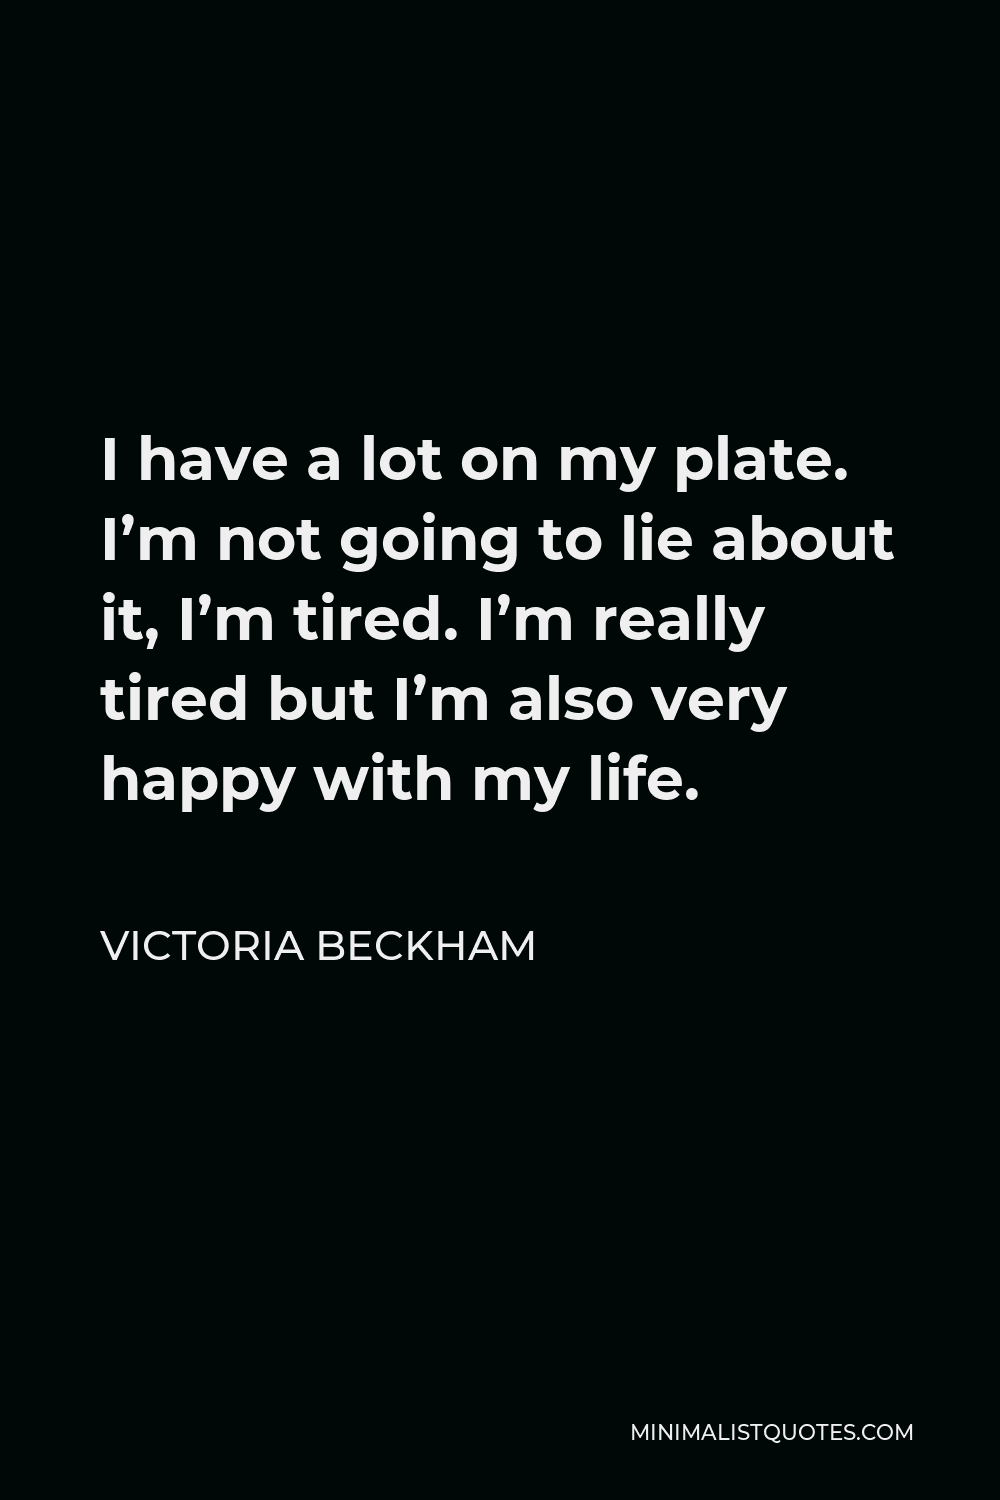 Victoria Beckham Quote - I have a lot on my plate. I’m not going to lie about it, I’m tired. I’m really tired but I’m also very happy with my life.